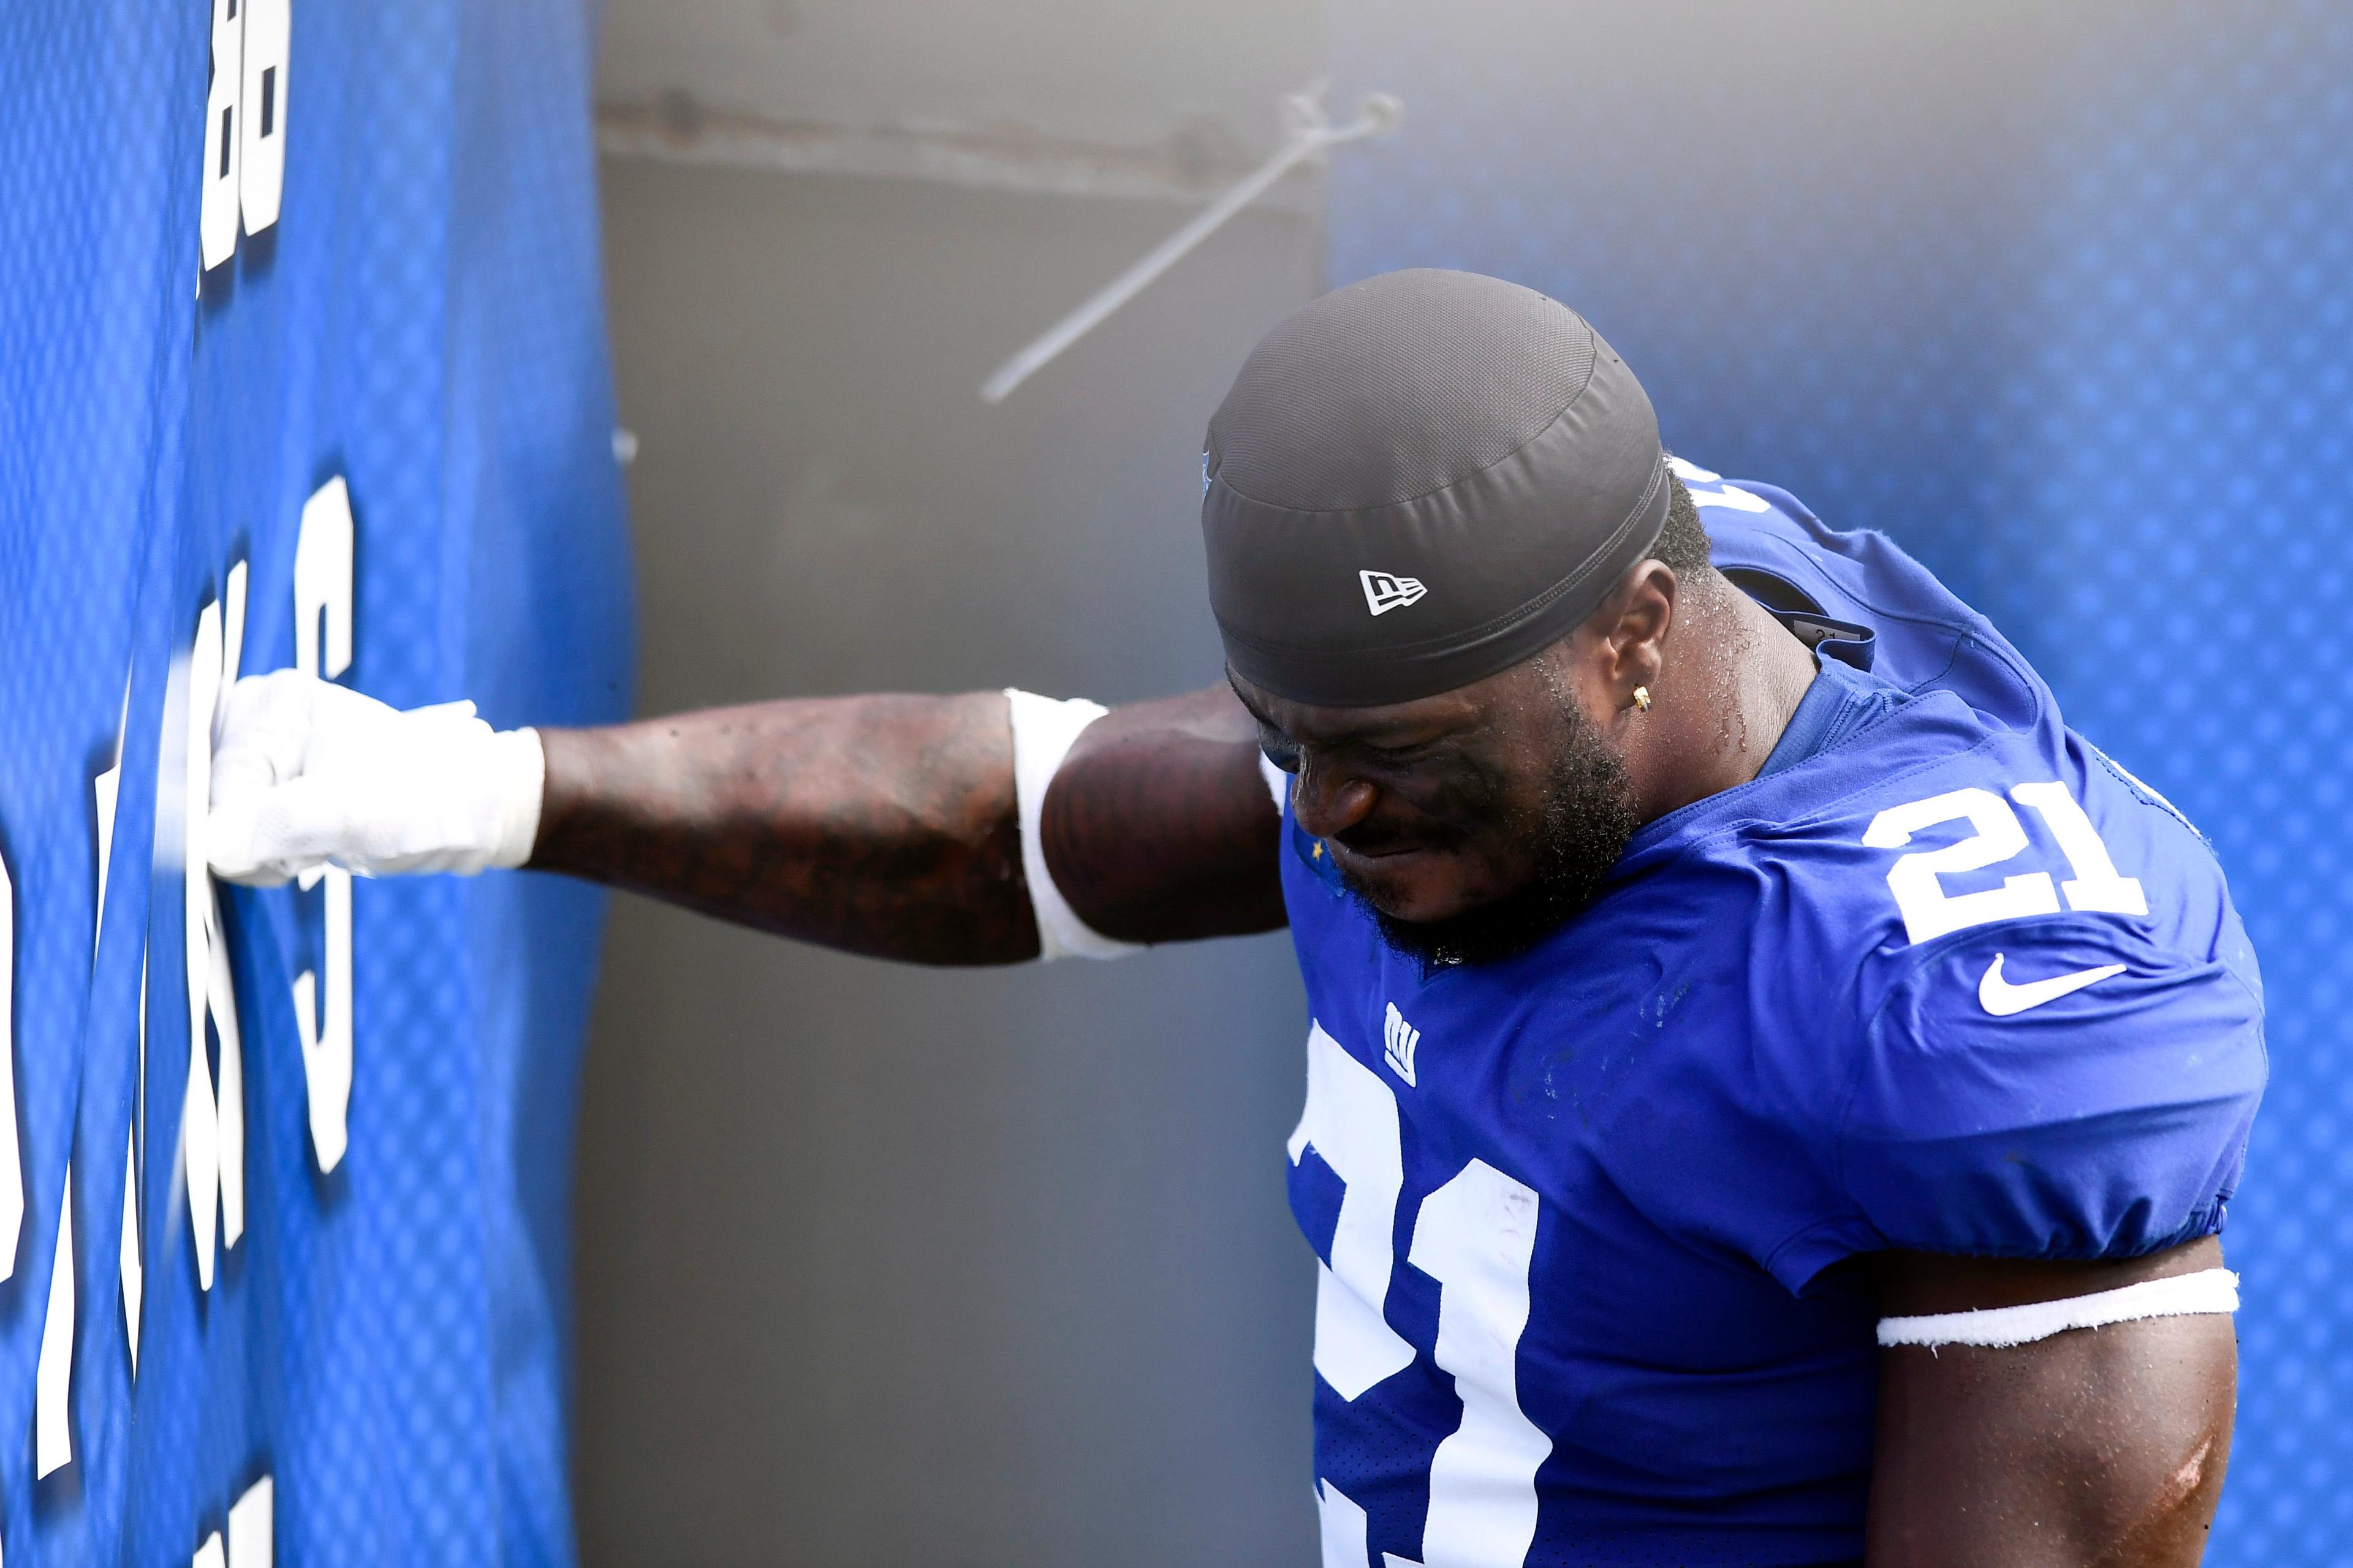 New York Giants safety Jabrill Peppers (21) reacts after leaving the game with an injury in the first quarter. The New York Giants face the San Francisco 49ers in an NFL game at MetLife Stadium on Sunday, Sept. 27, 2020, in East Rutherford. Giants 49ers / Danielle Parhizkaran/NorthJersey.com via Imagn Content Services, LLC